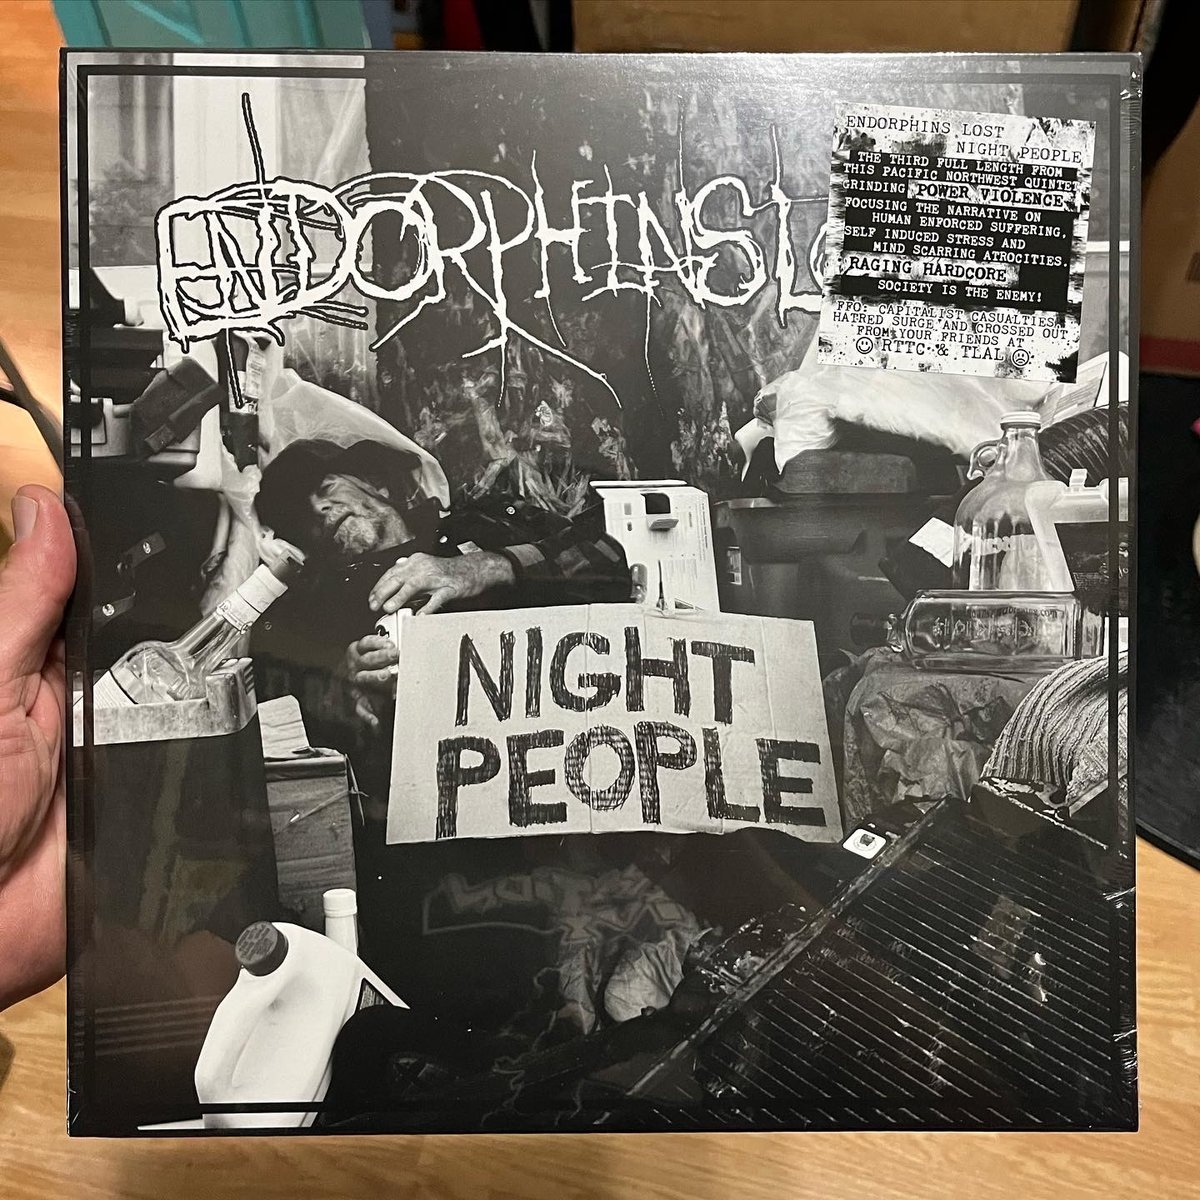 Image of Endorphins Lost - "Night People" LP